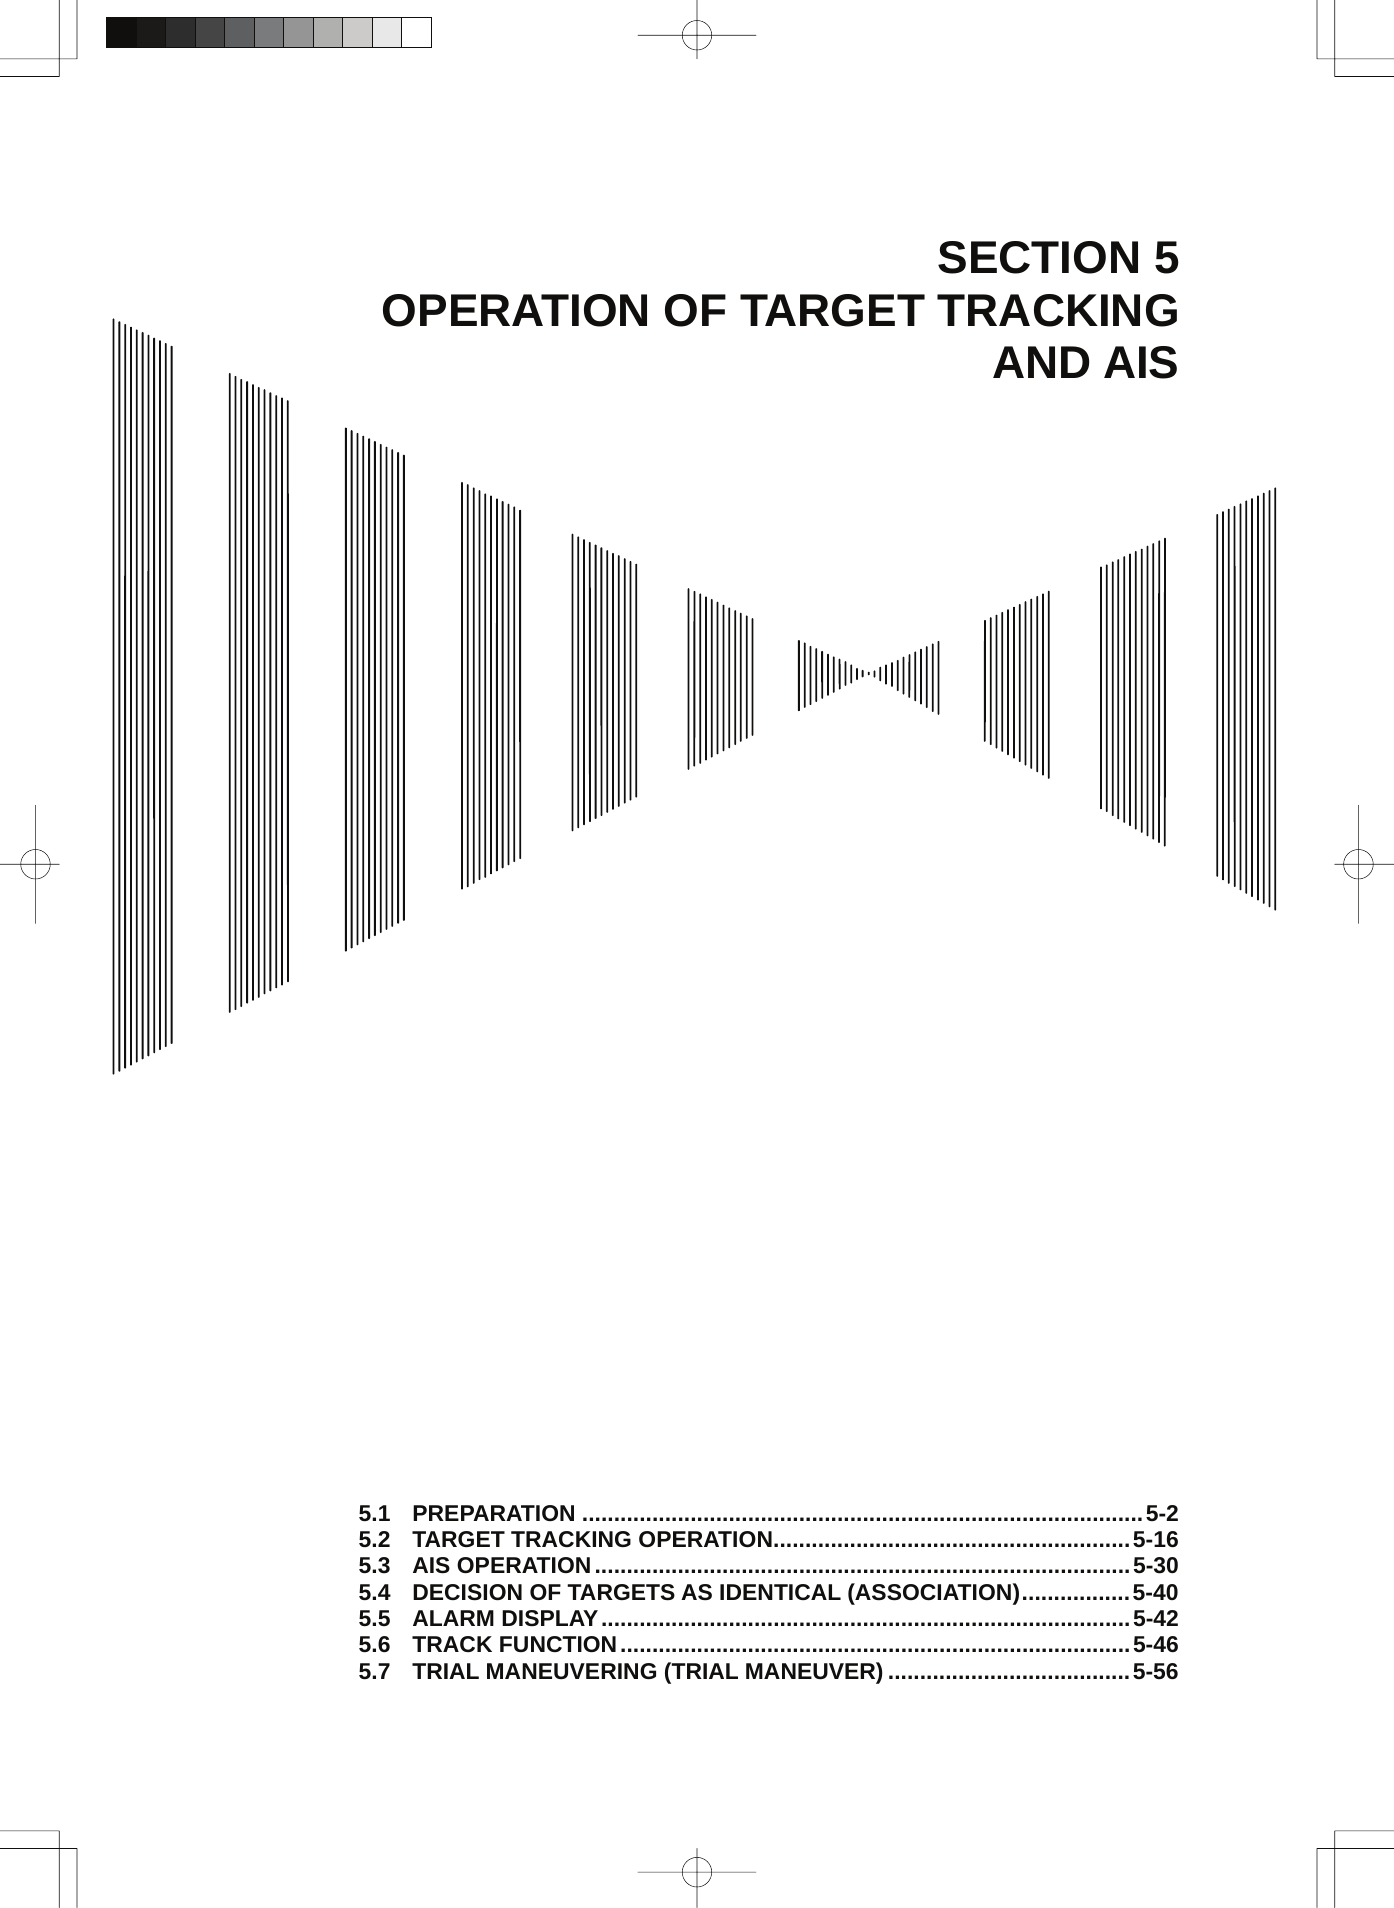  SECTION 5 OPERATION OF TARGET TRACKING AND AIS                                           5.1 PREPARATION ........................................................................................5-2 5.2 TARGET TRACKING OPERATION........................................................5-16 5.3 AIS OPERATION....................................................................................5-30 5.4 DECISION OF TARGETS AS IDENTICAL (ASSOCIATION).................5-40 5.5 ALARM DISPLAY...................................................................................5-42 5.6 TRACK FUNCTION................................................................................5-46 5.7 TRIAL MANEUVERING (TRIAL MANEUVER) ......................................5-56 